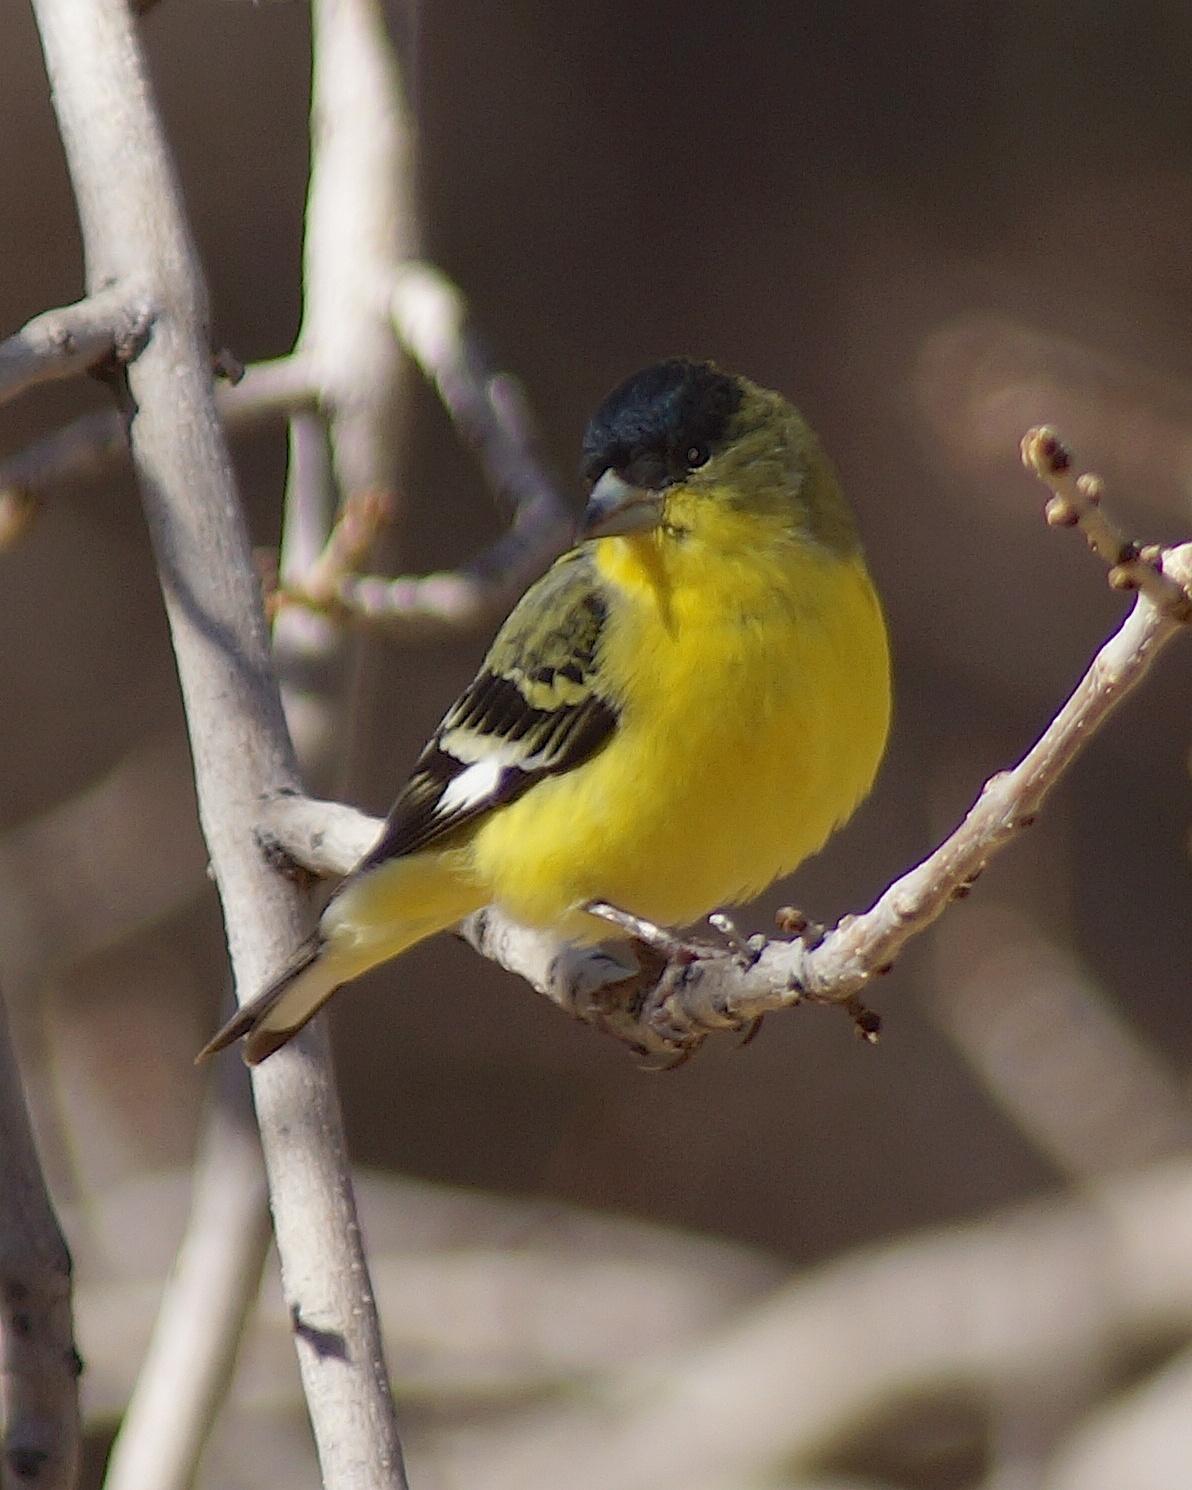 Lesser Goldfinch Photo by Gerald Hoekstra